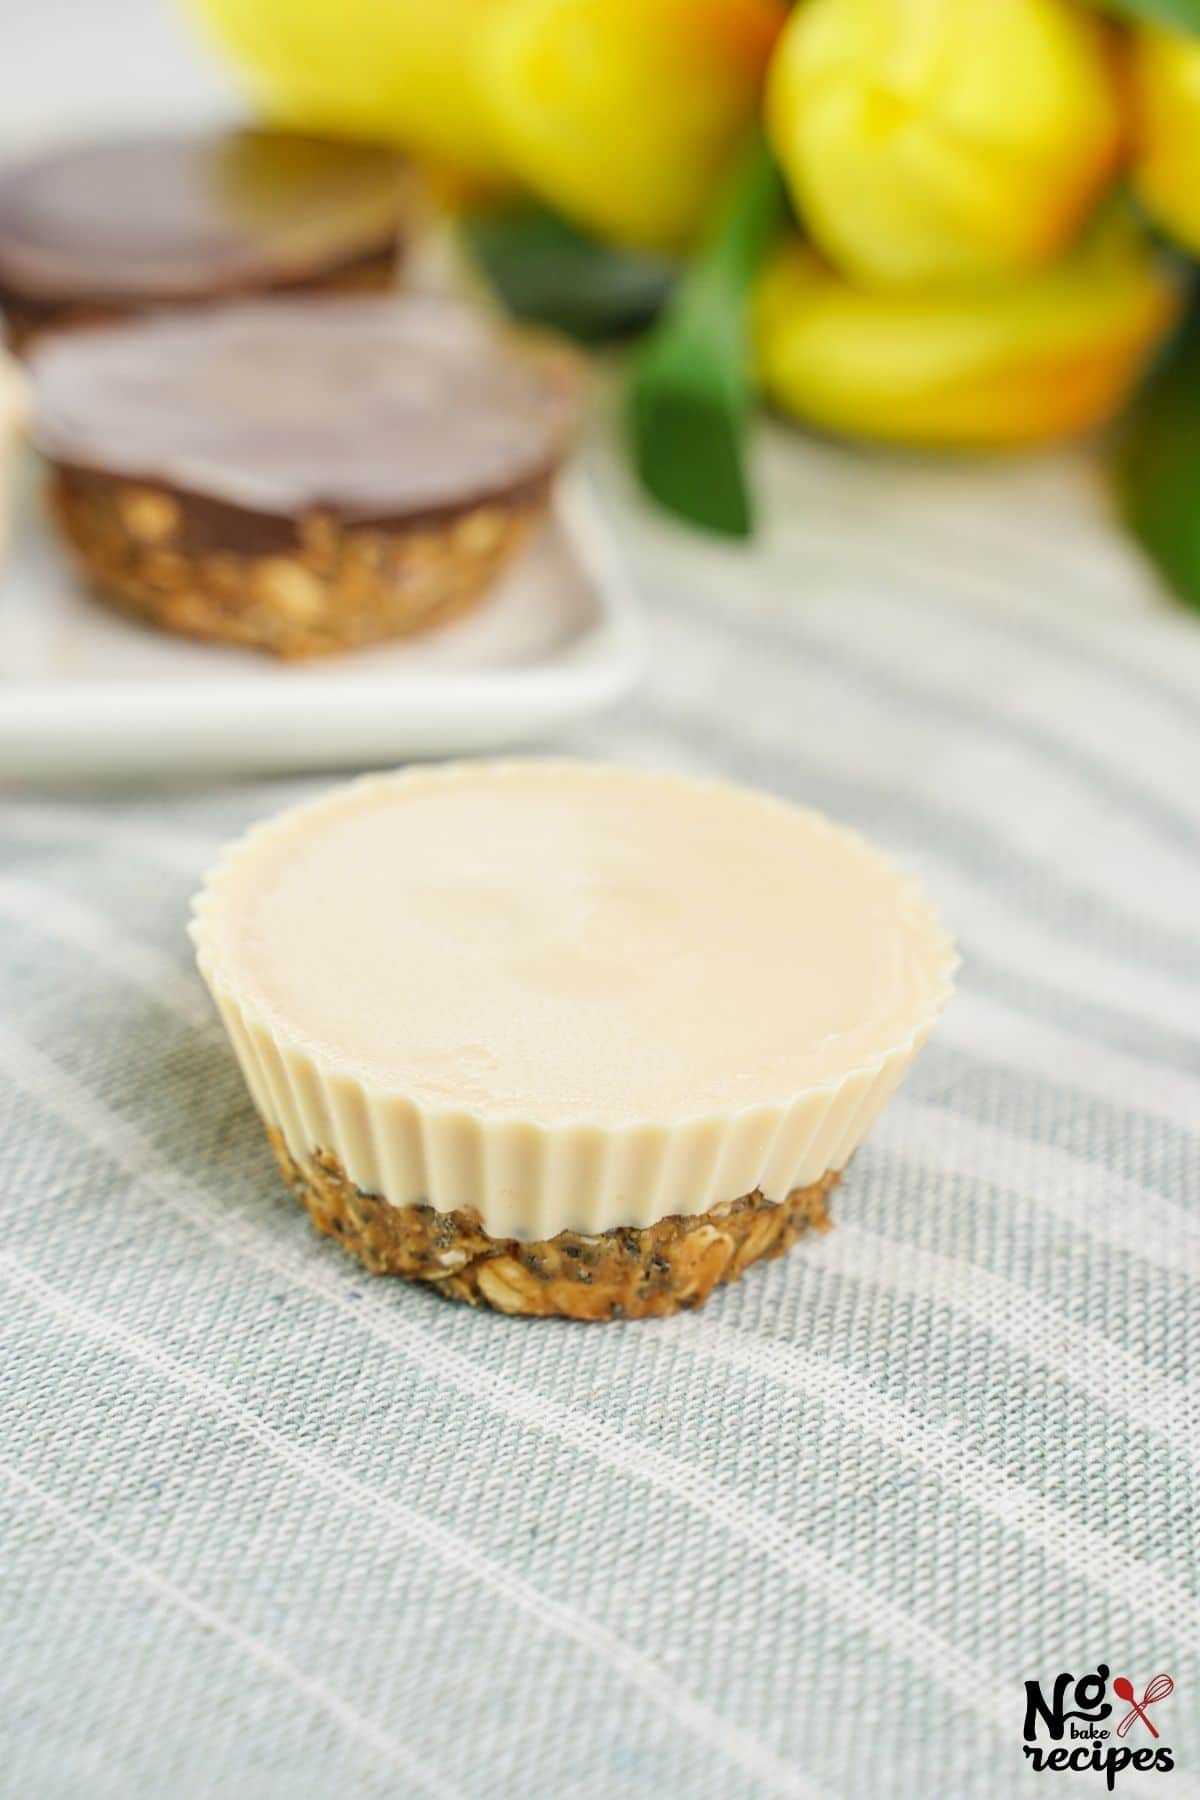 white chocolate and milk chocolate oatmeal cups on striped napkin